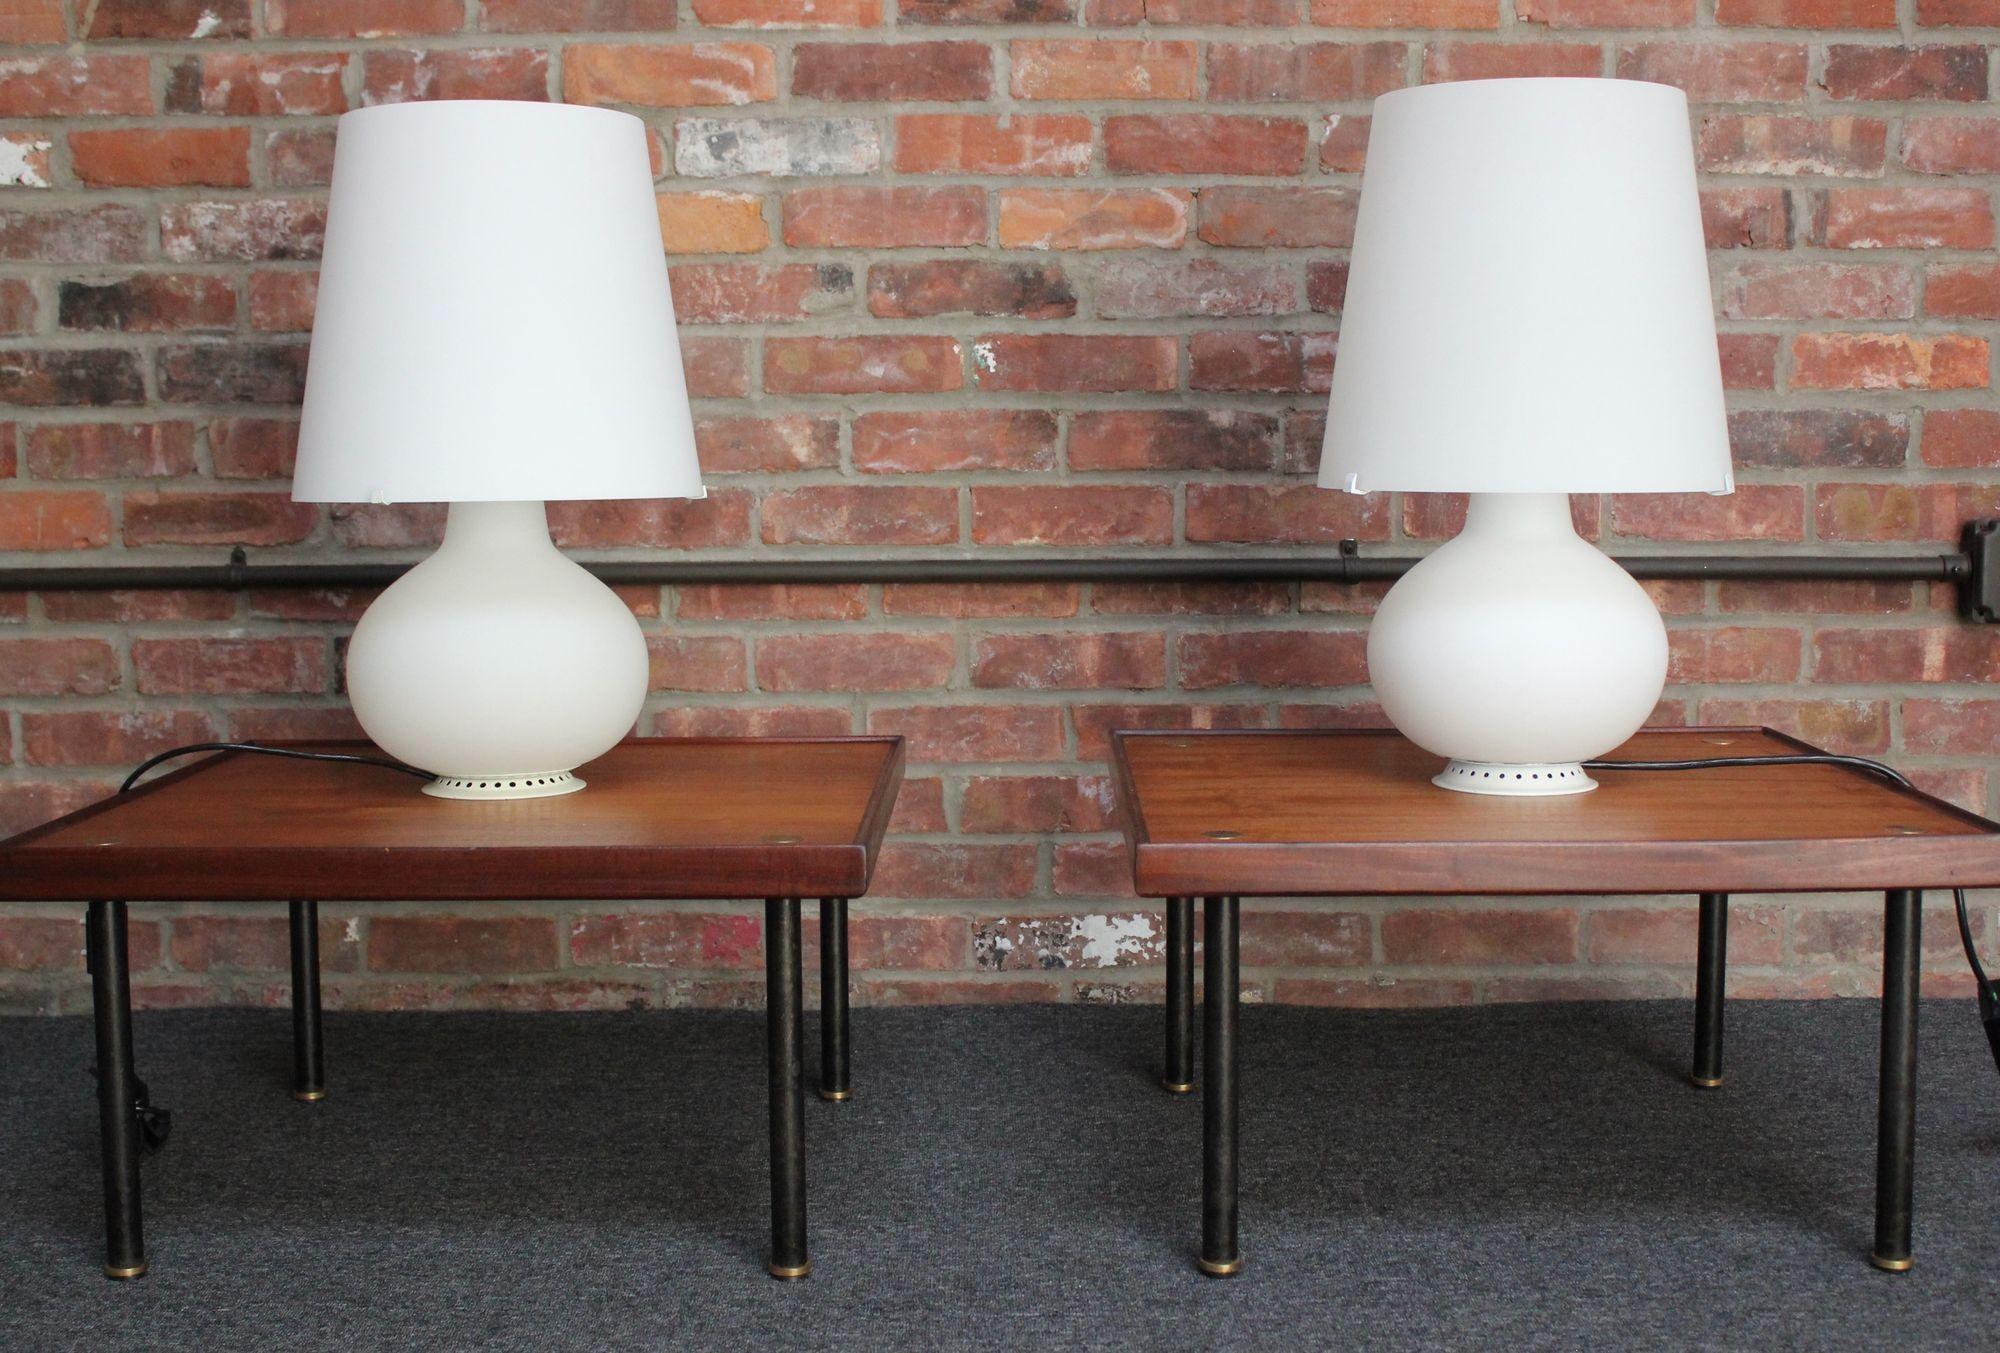 Pair of iconic model 1853 frosted glass table lamps designed in 1954 by the French glassmaker, Max Ingrand, for Fontana Arte, Italy.
Stylish, practical lamps occupying a small footprint but emitting a strong and pleasant light from two sources